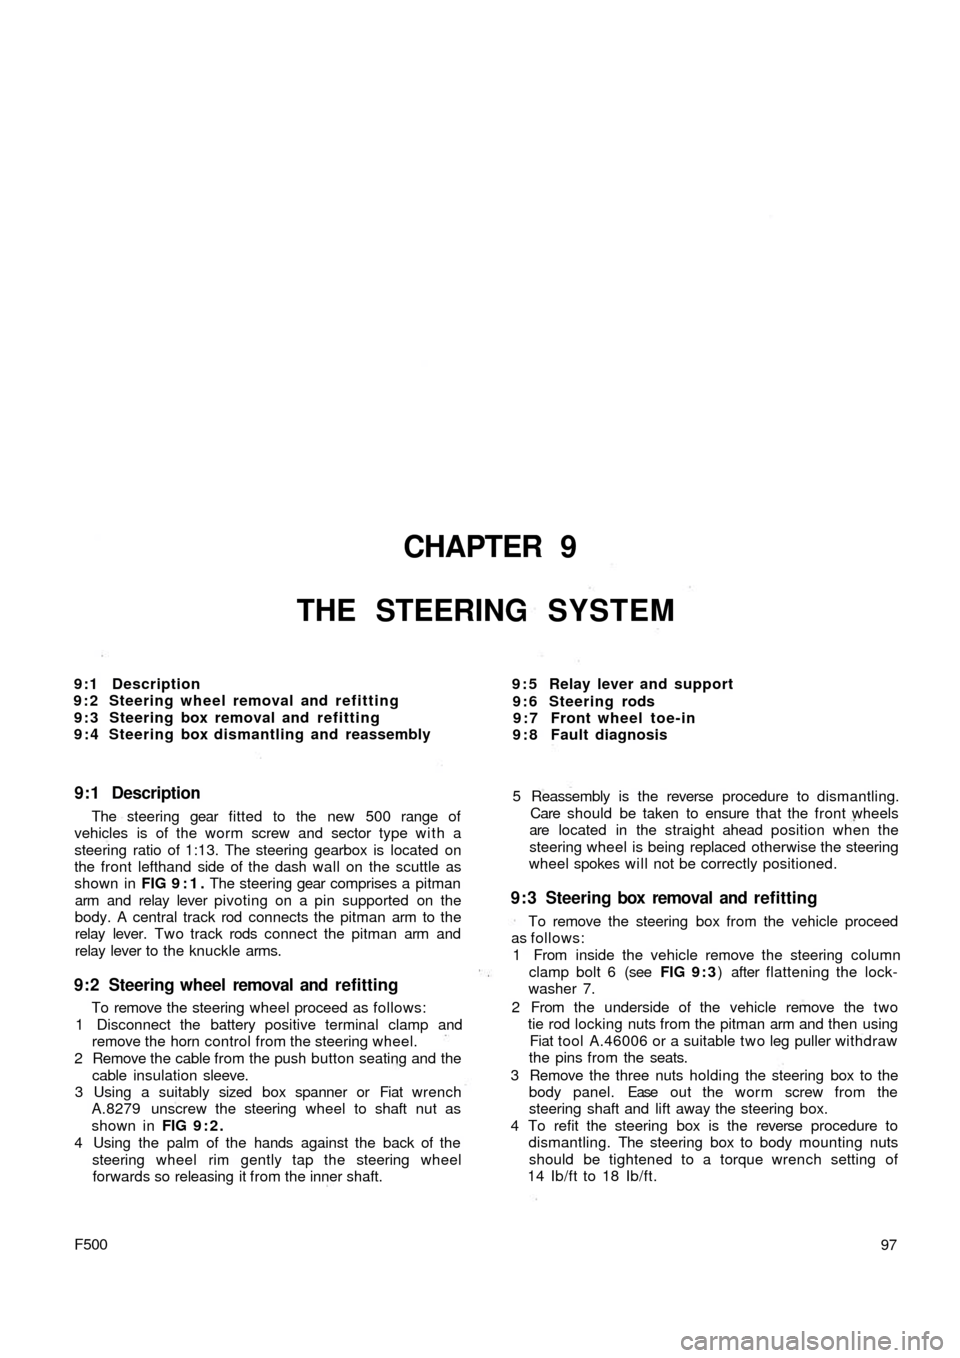 FIAT 500 1959 1.G Workshop Manual CHAPTER 9
THE STEERING SYSTEM
9 : 5 Relay lever and support
9 : 6 Steering rods
9 : 7 Front wheel toe-in
9 : 8 Fault diagnosis 9:1 Description
9 : 2 Steering wheel removal and refitting
9 : 3 Steering